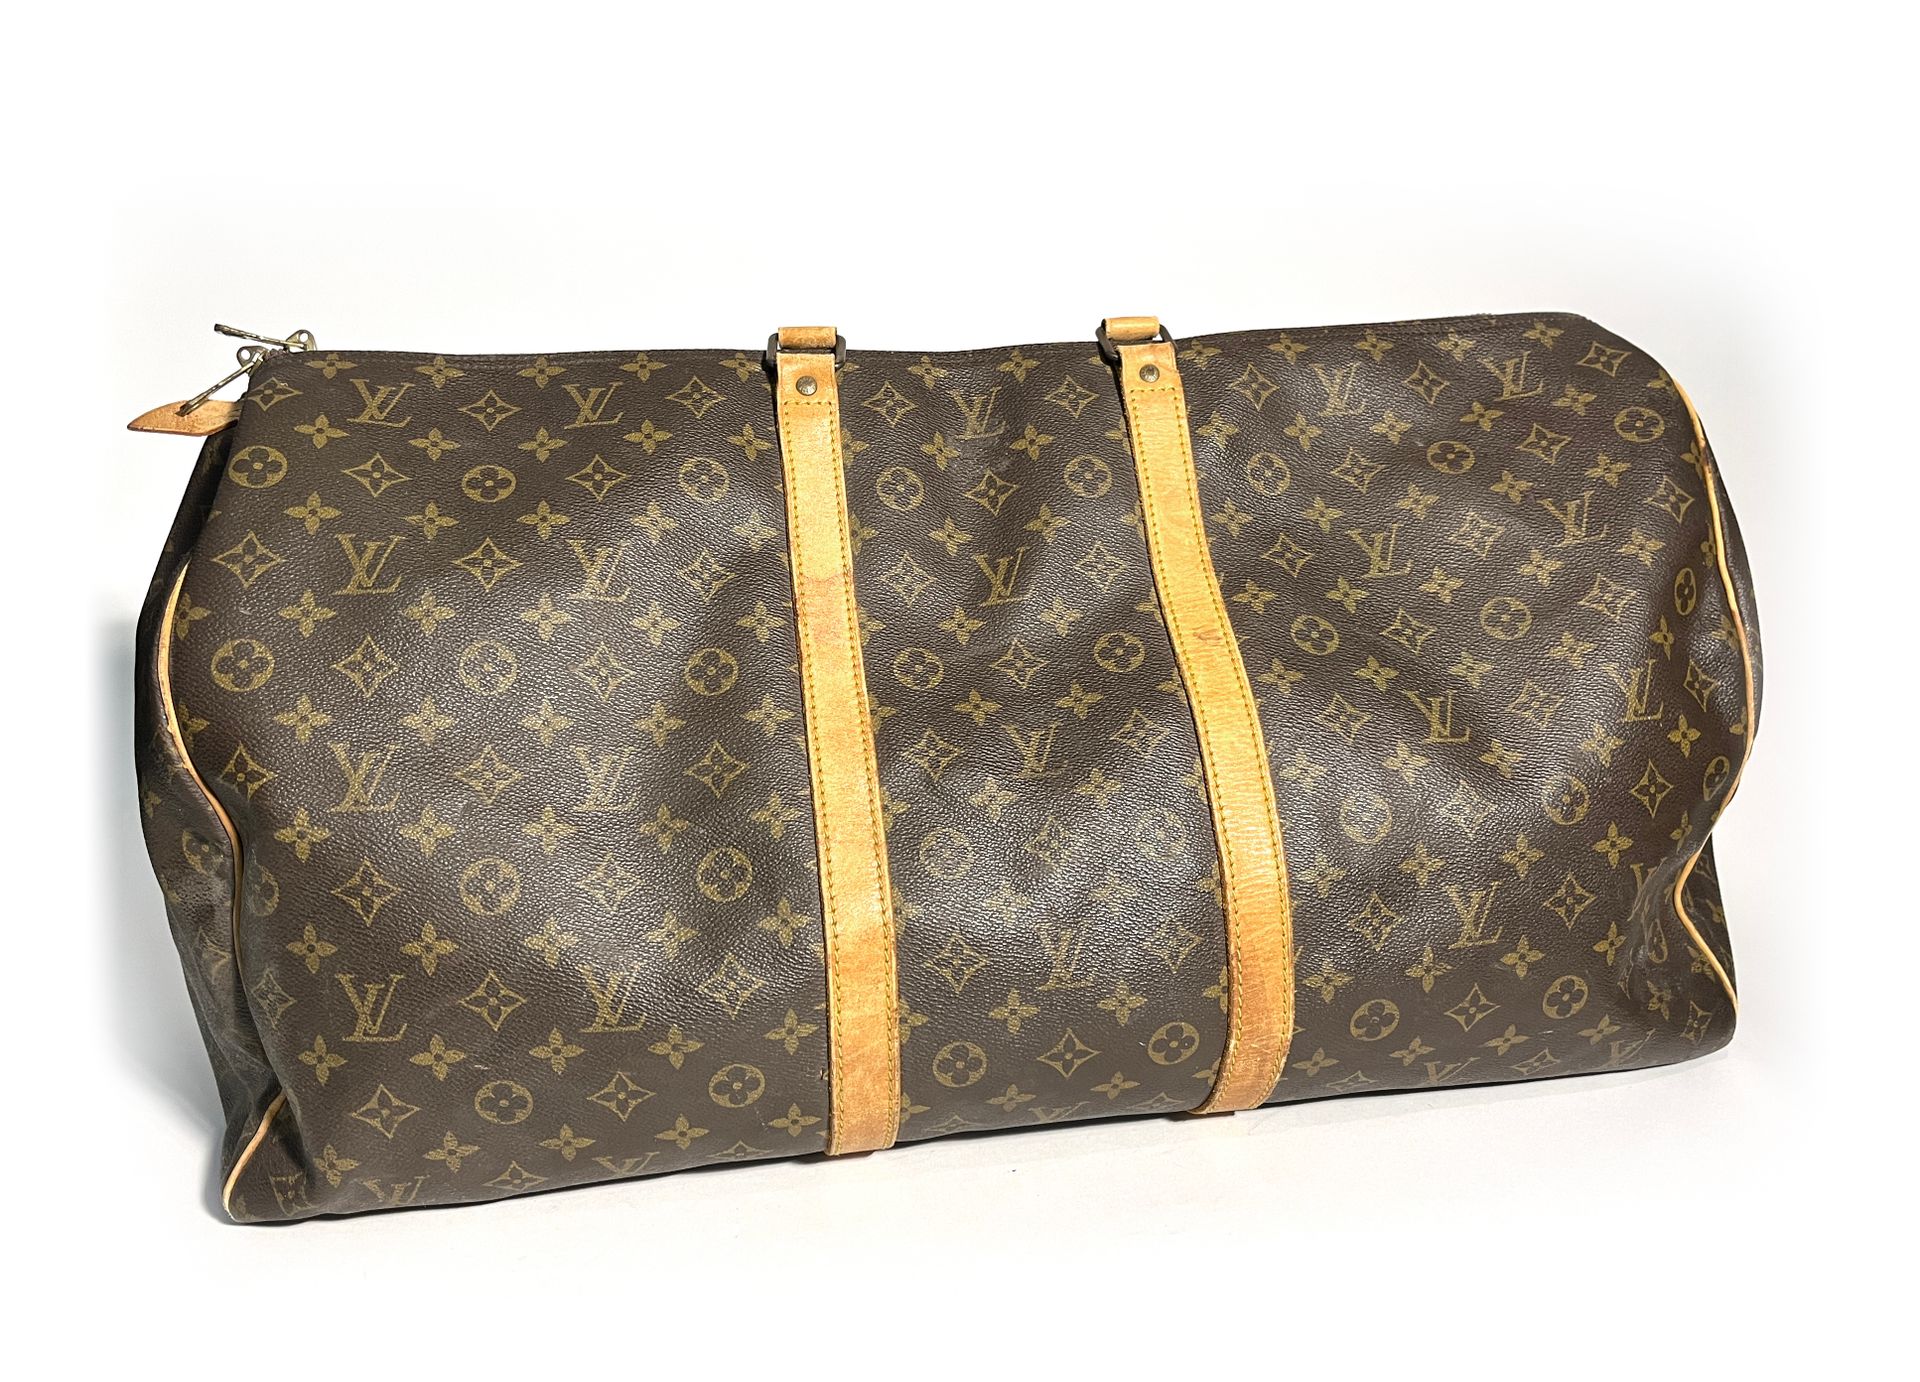 Null Louis Vuitton. Monogrammed leather travel bag